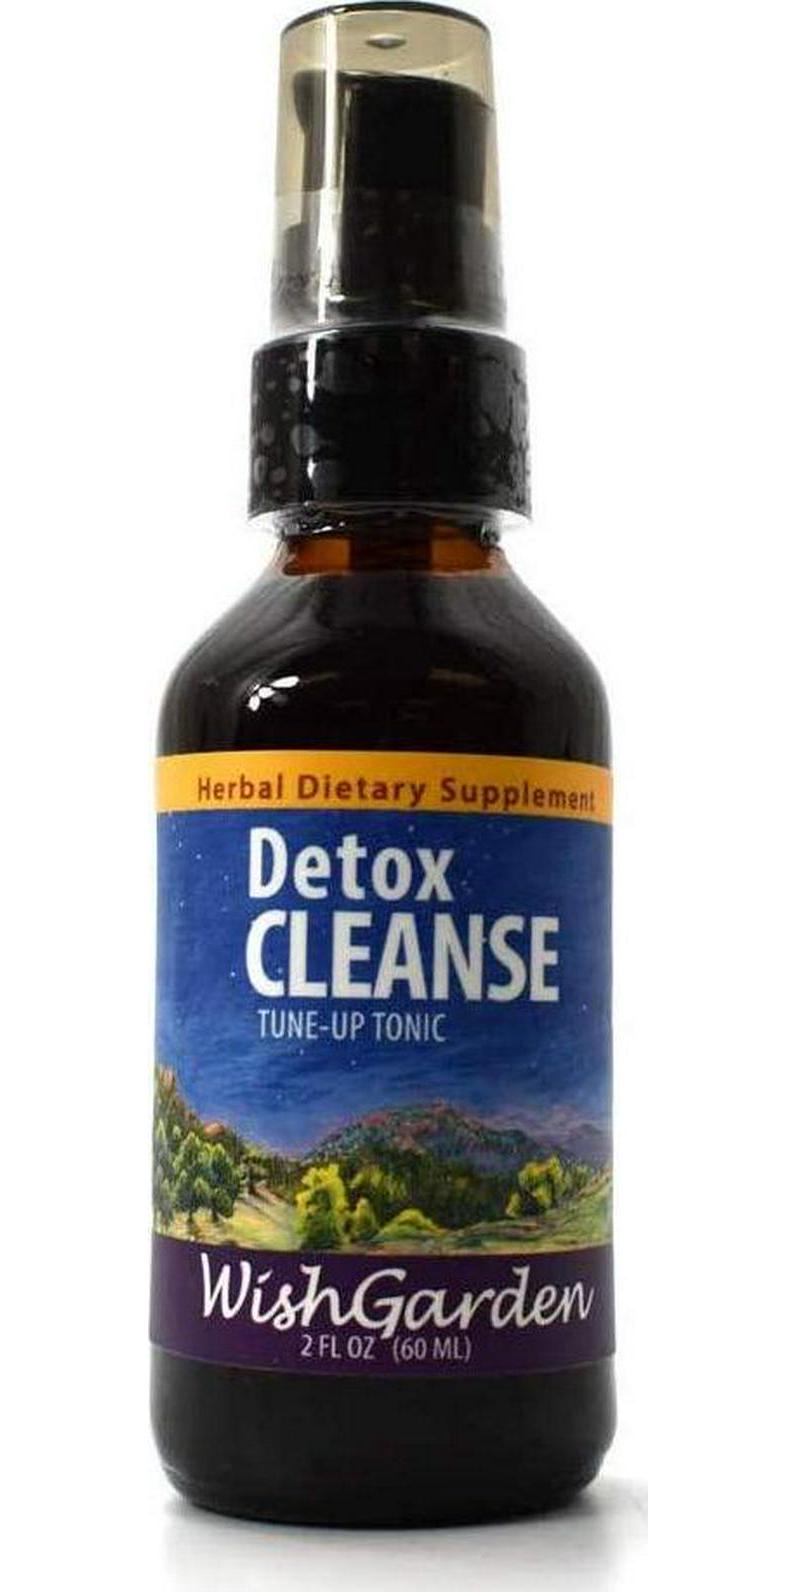 WishGarden Herbs Detox Cleanse Tune-Up Tonic - Supports Natural System Cleansing, Aids Celluar Health, Gentle Detox for Healthy Liver and Kidney Function (2oz)